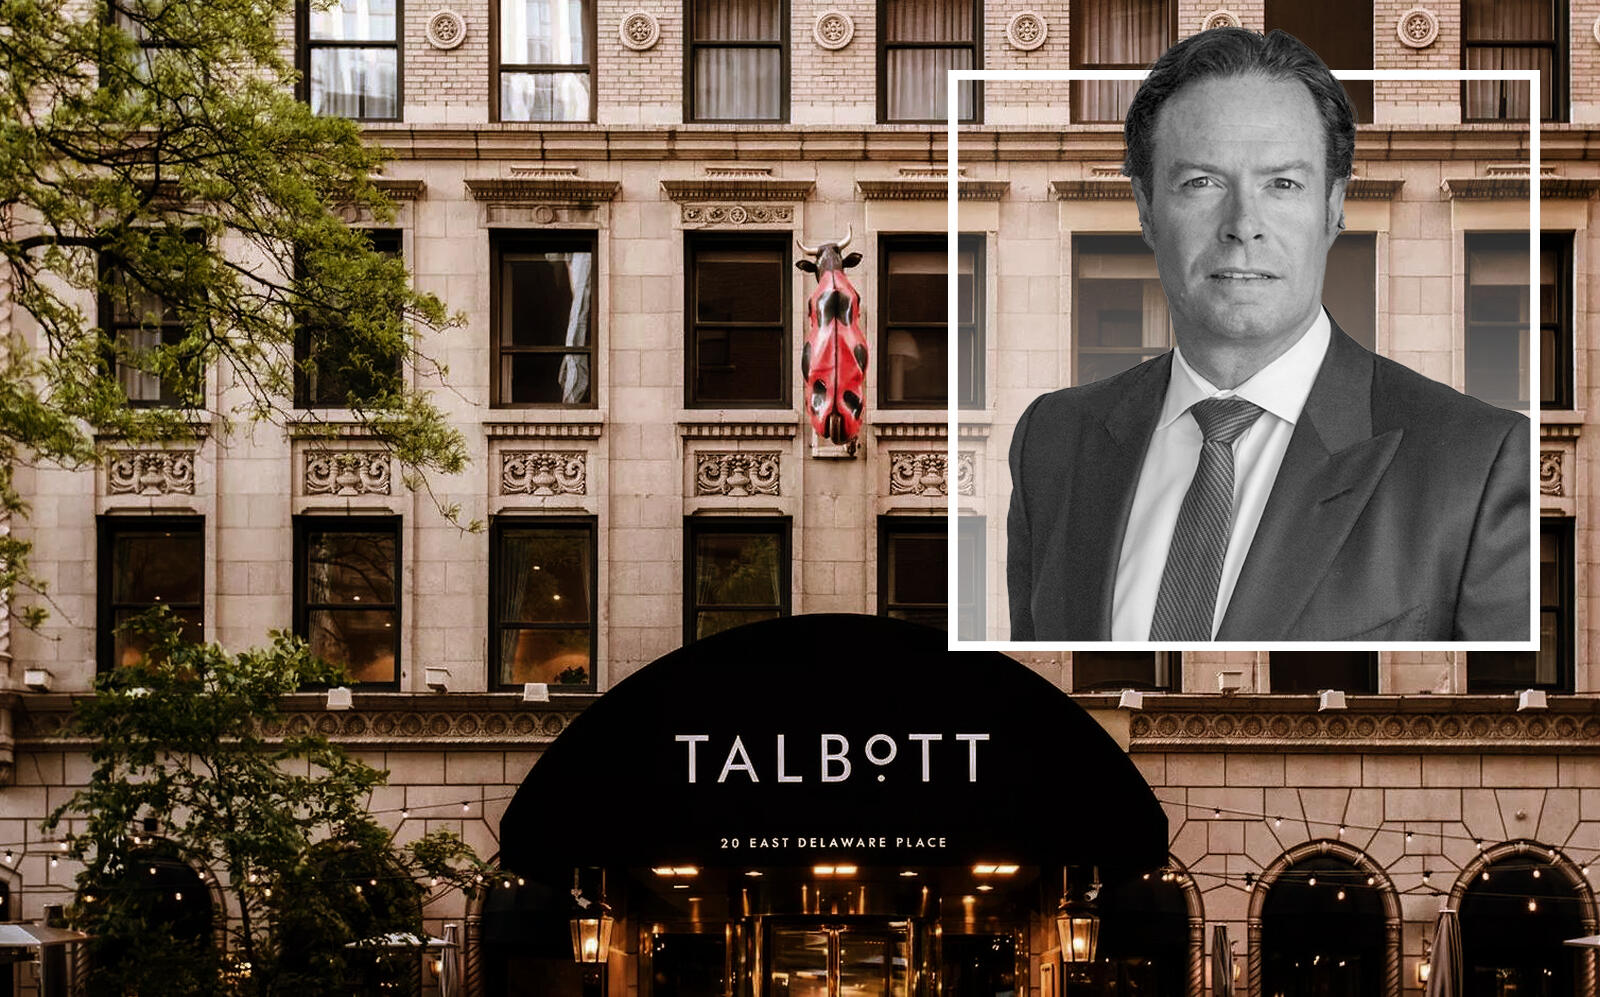 FullG Capital CEO Drew Coles and The Talbott Hotel (FullG, Facebook via The Talbott Hotel)